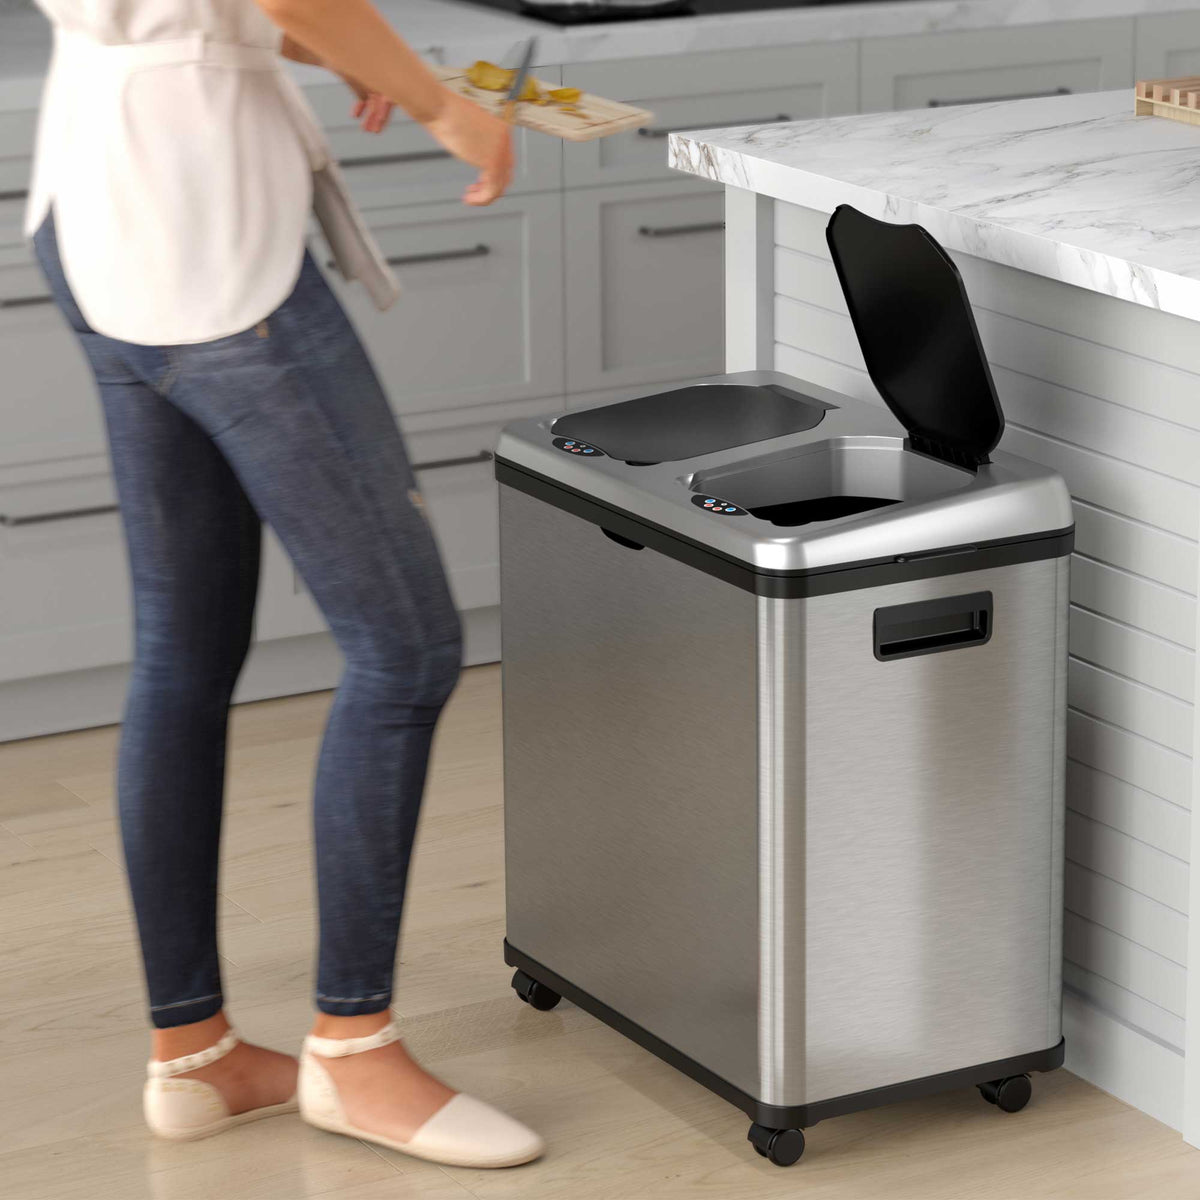 iTouchless 16 Gallon / 61 Liter Stainless Steel Sensor Recycle Bin & Trash Can in kitchen